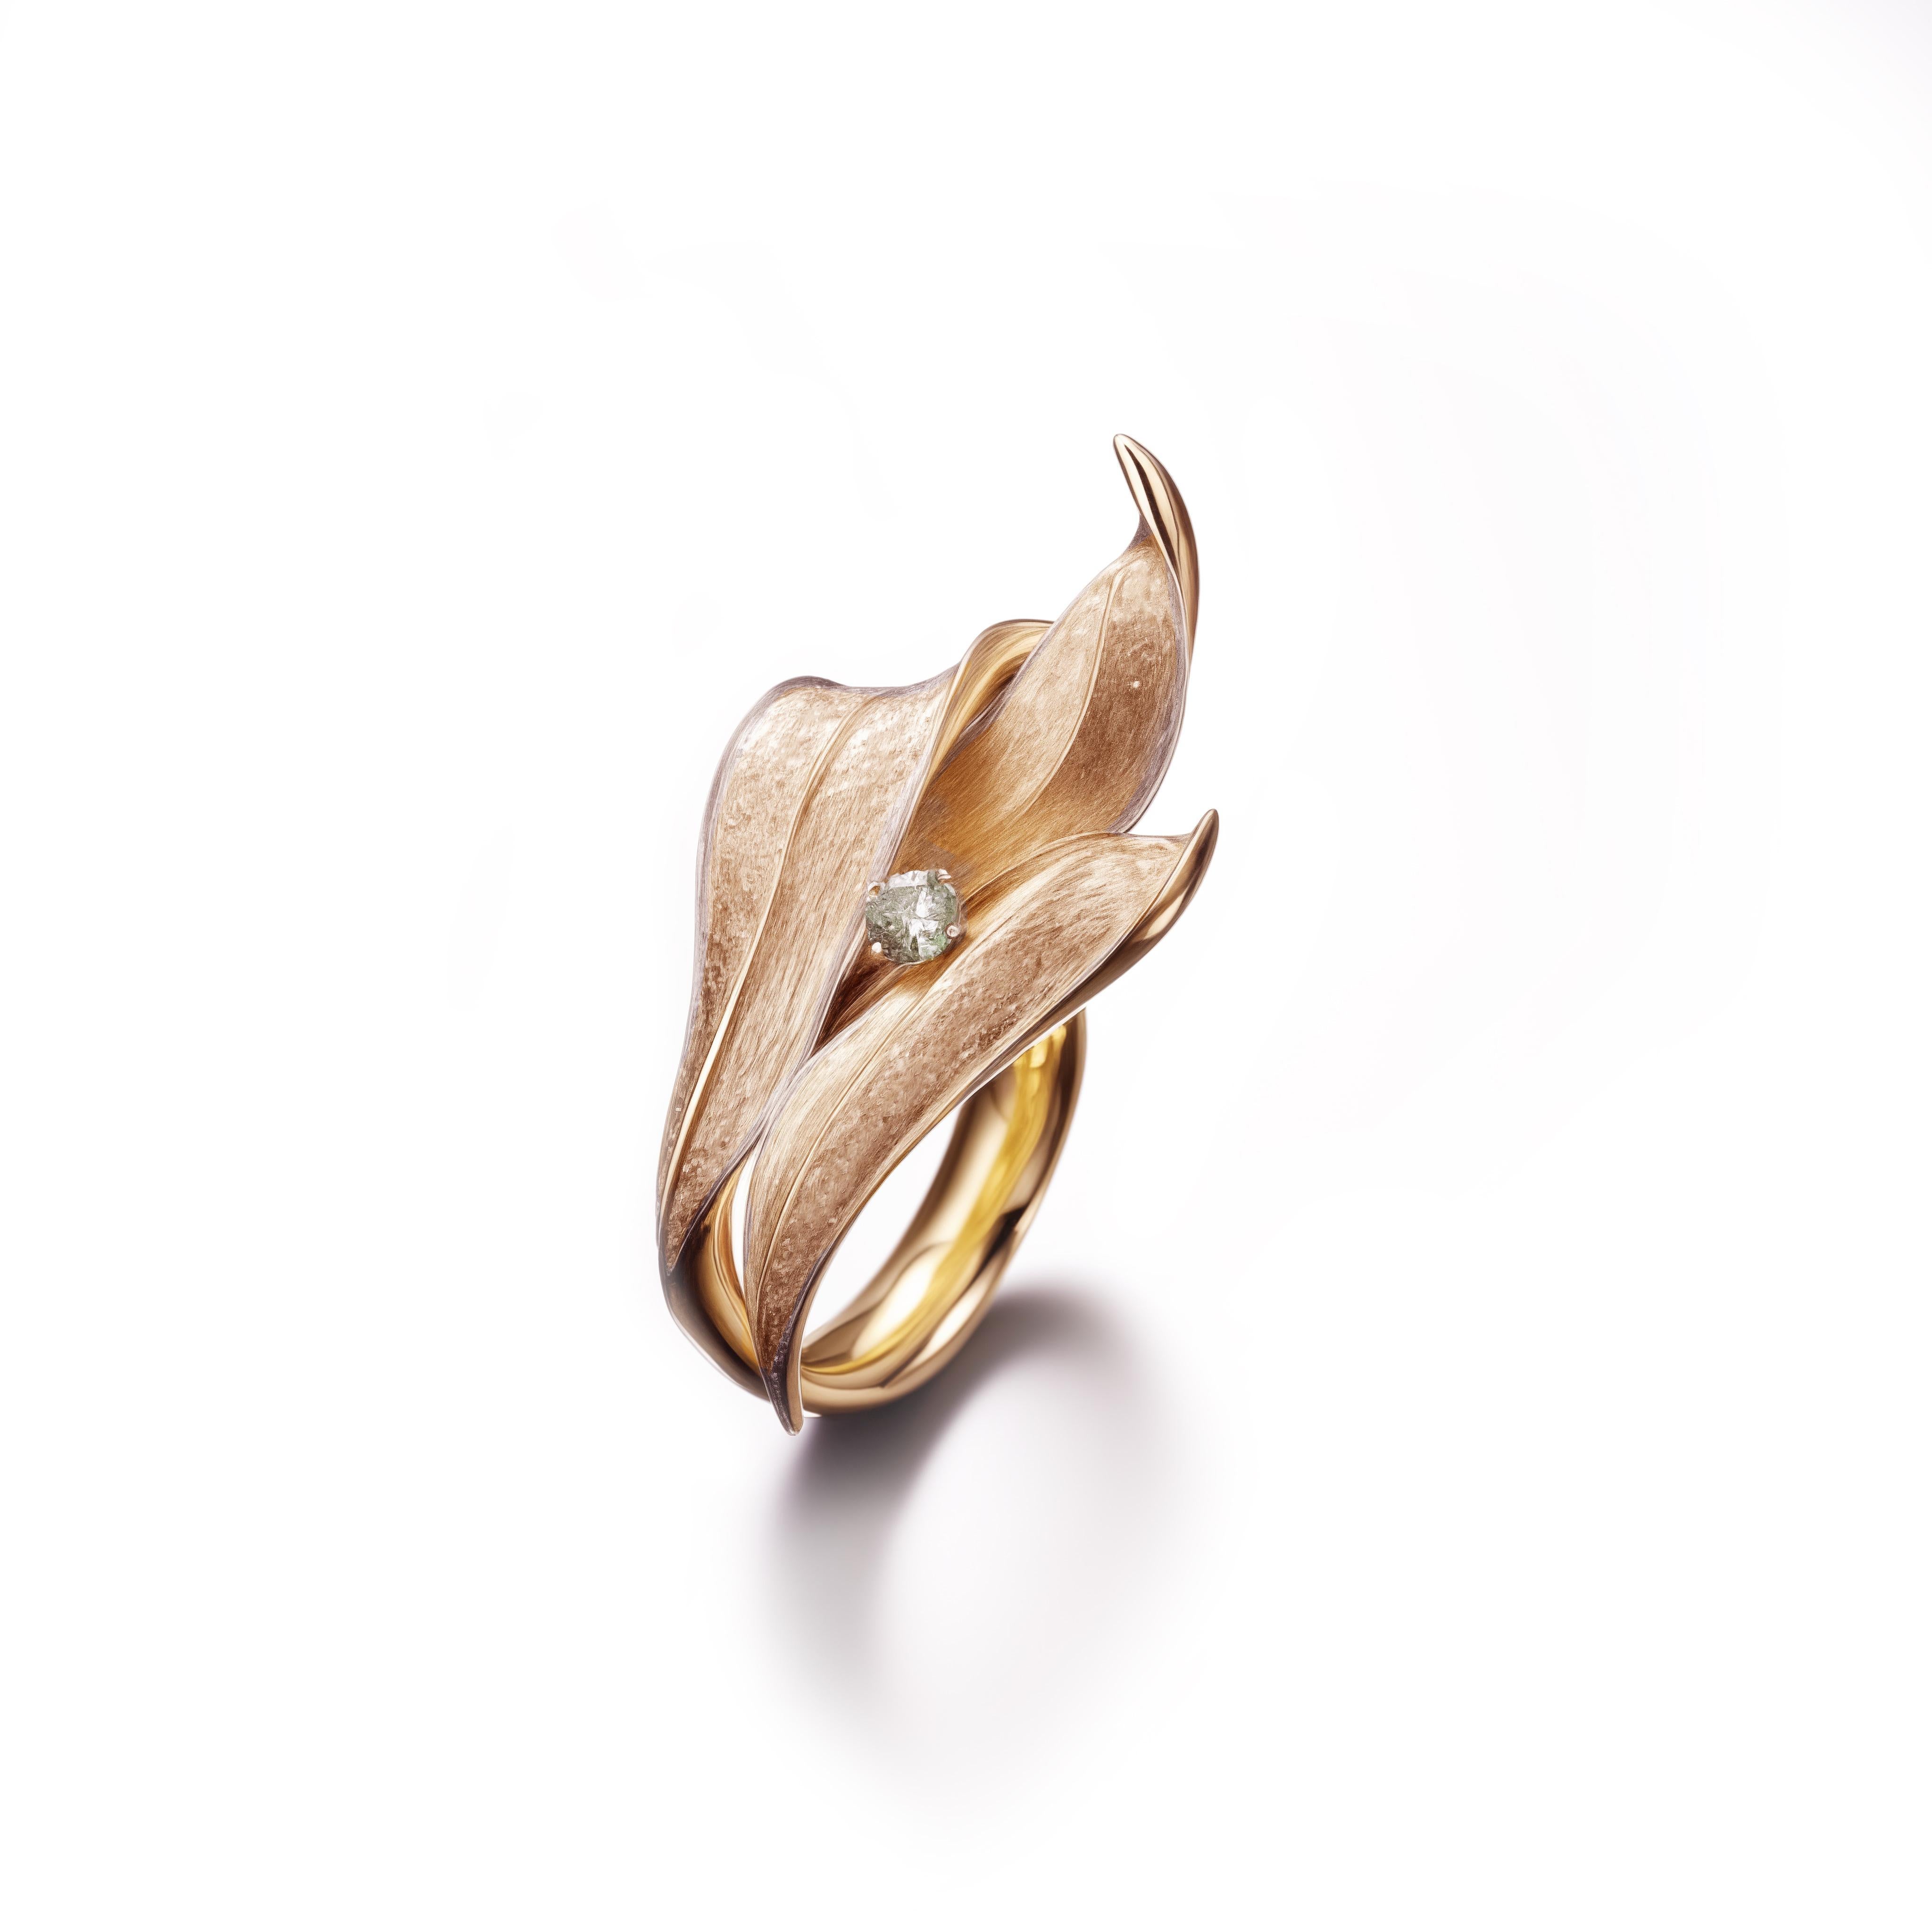 This contemporary Lily of The Valley Engagement Ring is made of 18 karat rose gold and one round tourmaline. It has a sculptural shape. We work with German gems companies that have been in business since the 19th century. The ring can be